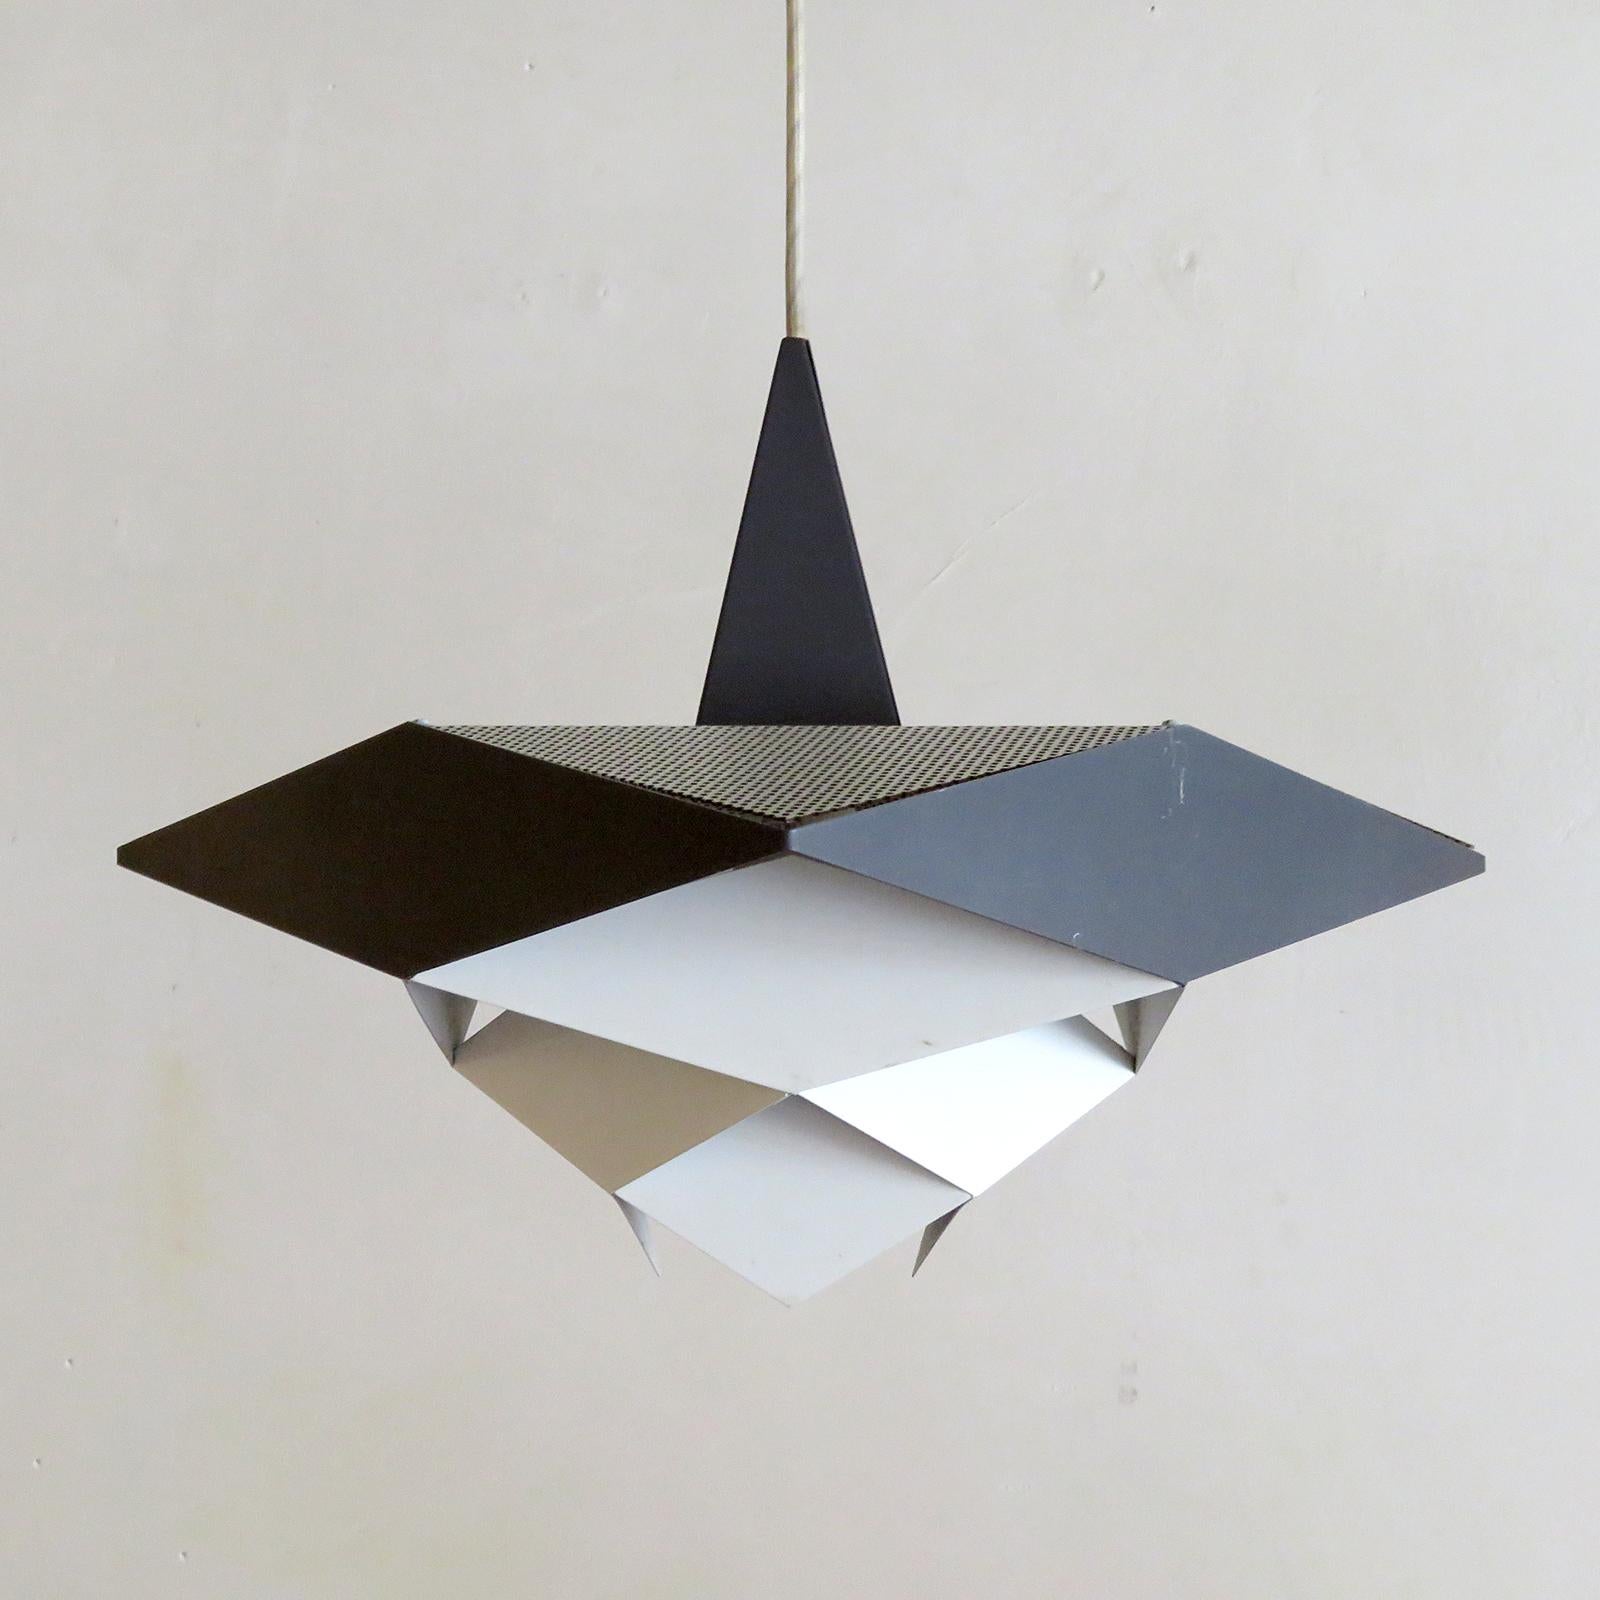 Wonderful geometric pendant light by Preben Dahl for Hans Følsgaard, 1960, made of interlocking, enameled metal rhomboid shapes in square two tone colored bands. Overall drop can be customized, wired for US standards, one E27 socket, max. wattage